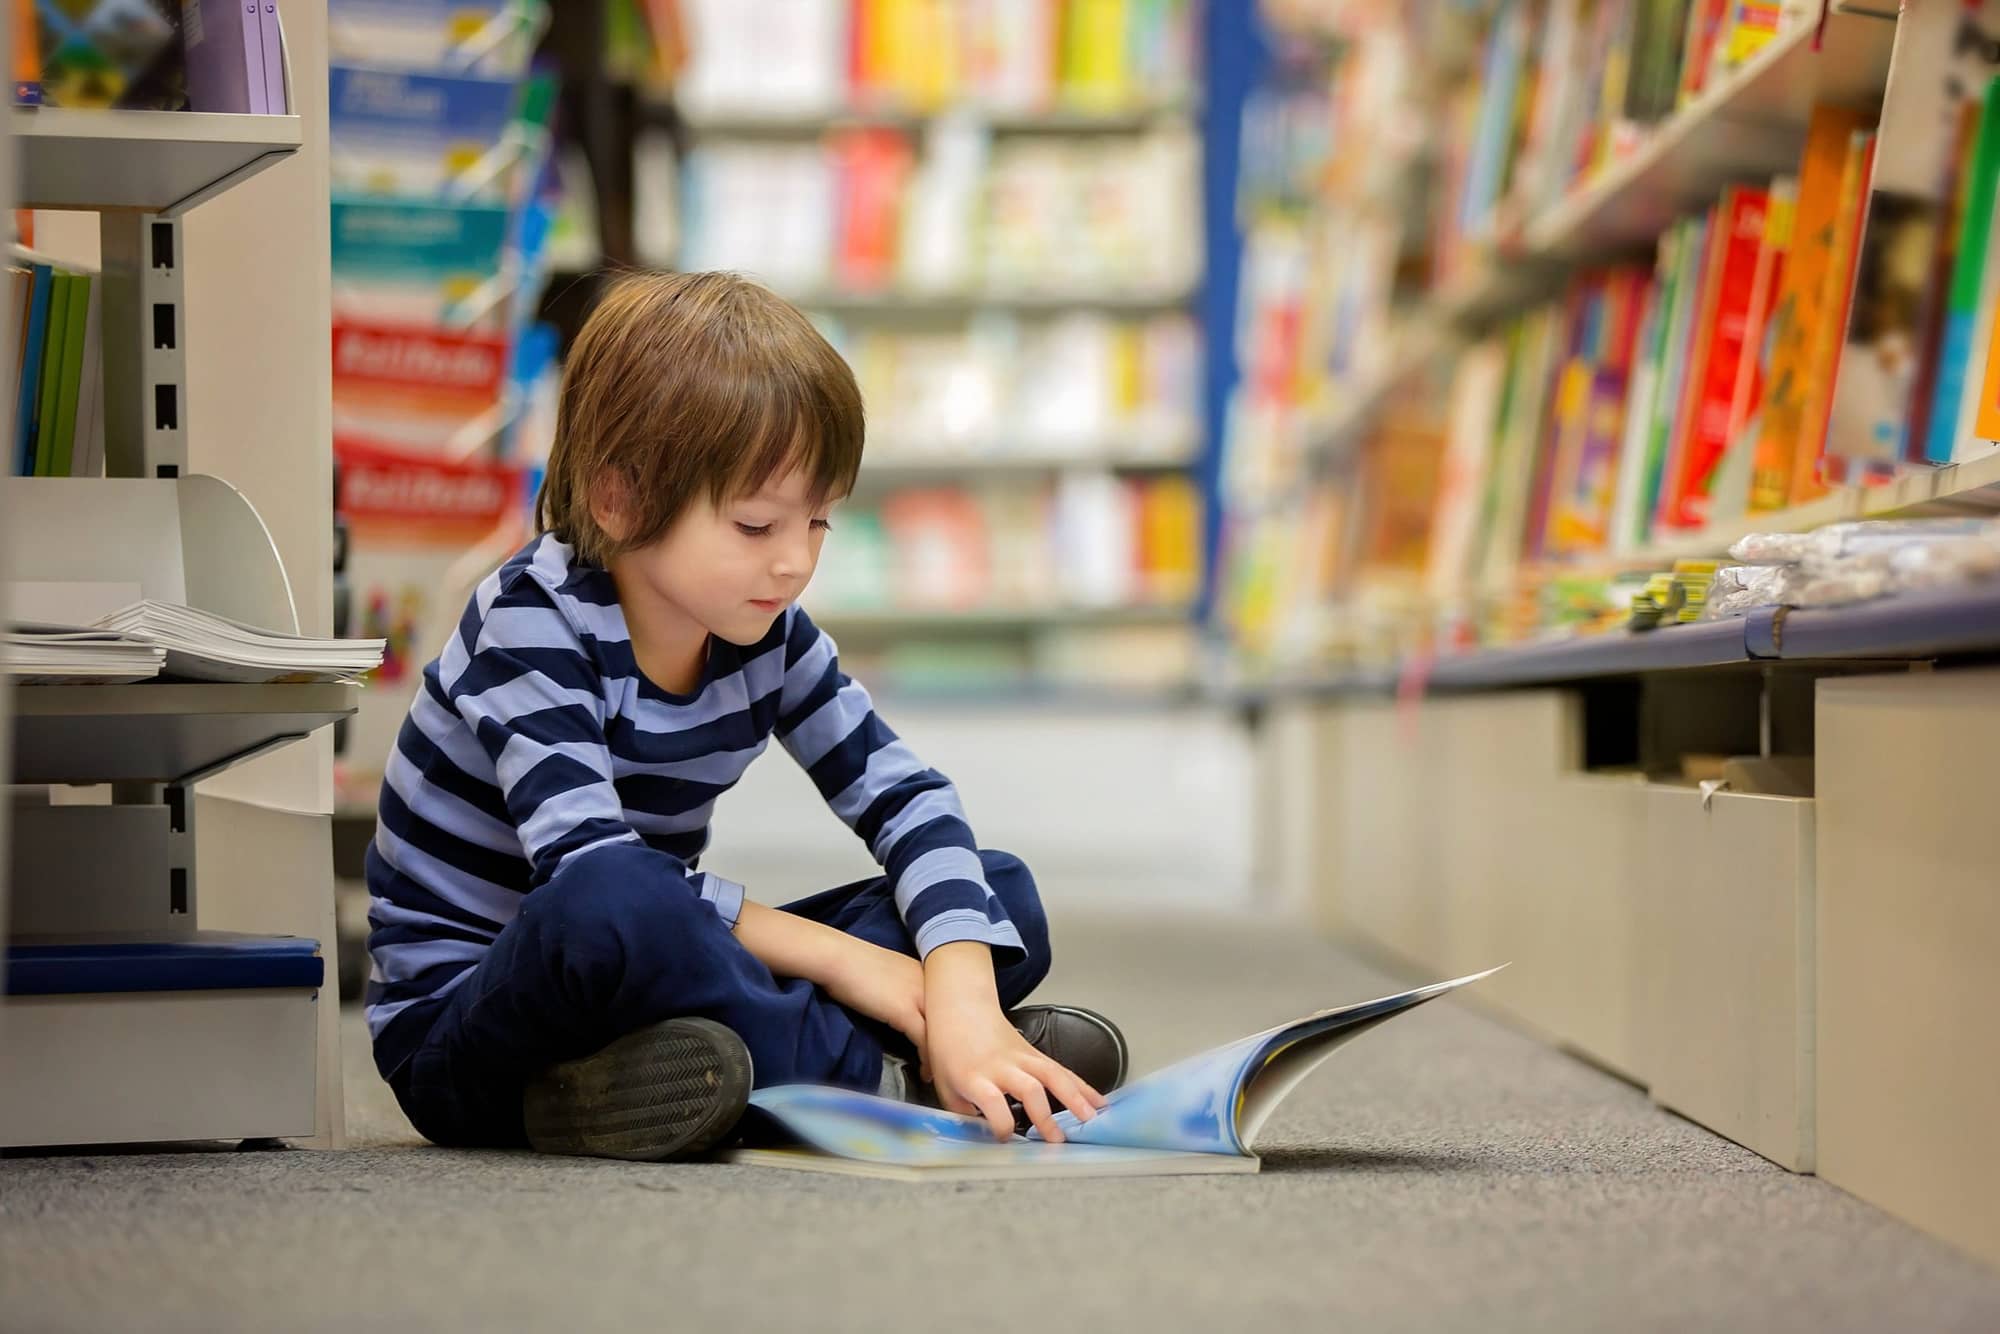 The Growing Demand Of Children’s Books